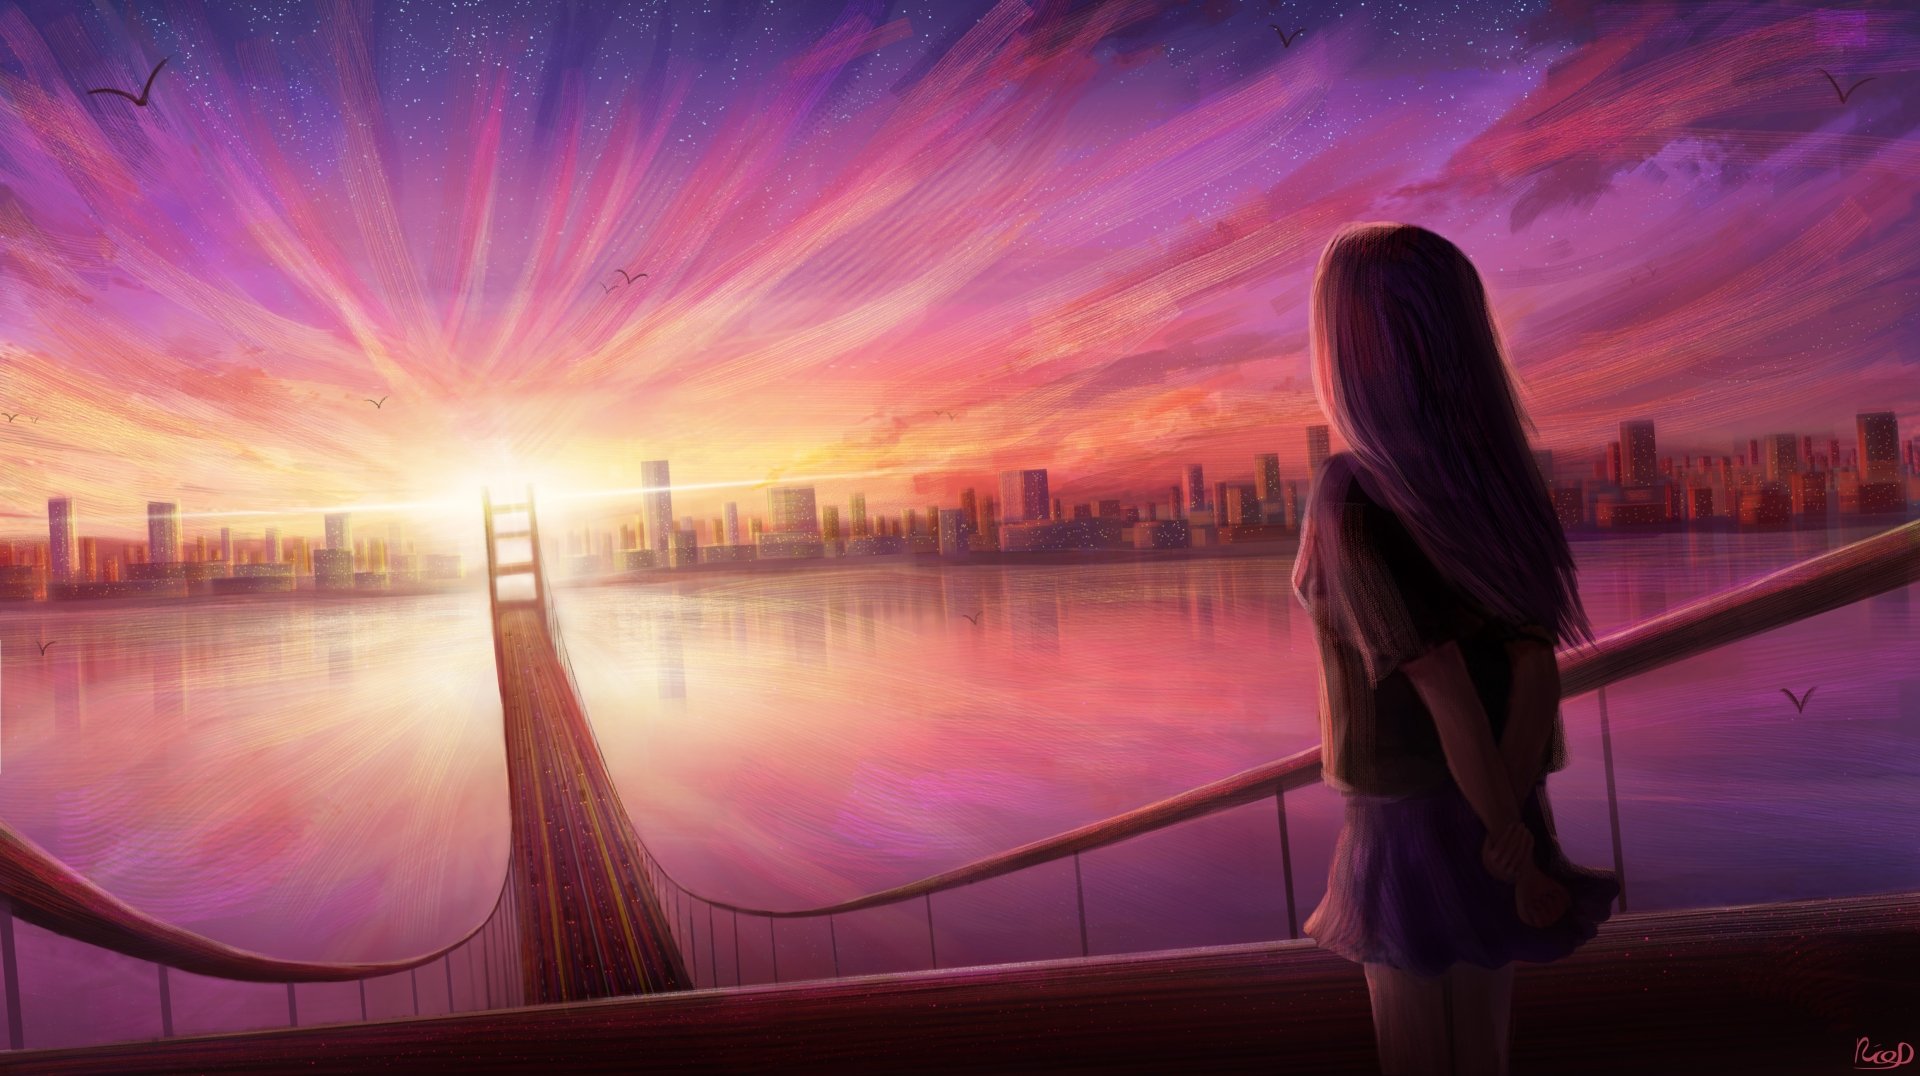 Anime-style HD wallpaper showing a scenic evening sunset over a bridge, with a young character gazing at the vibrant sky, set against a cityscape in the background.